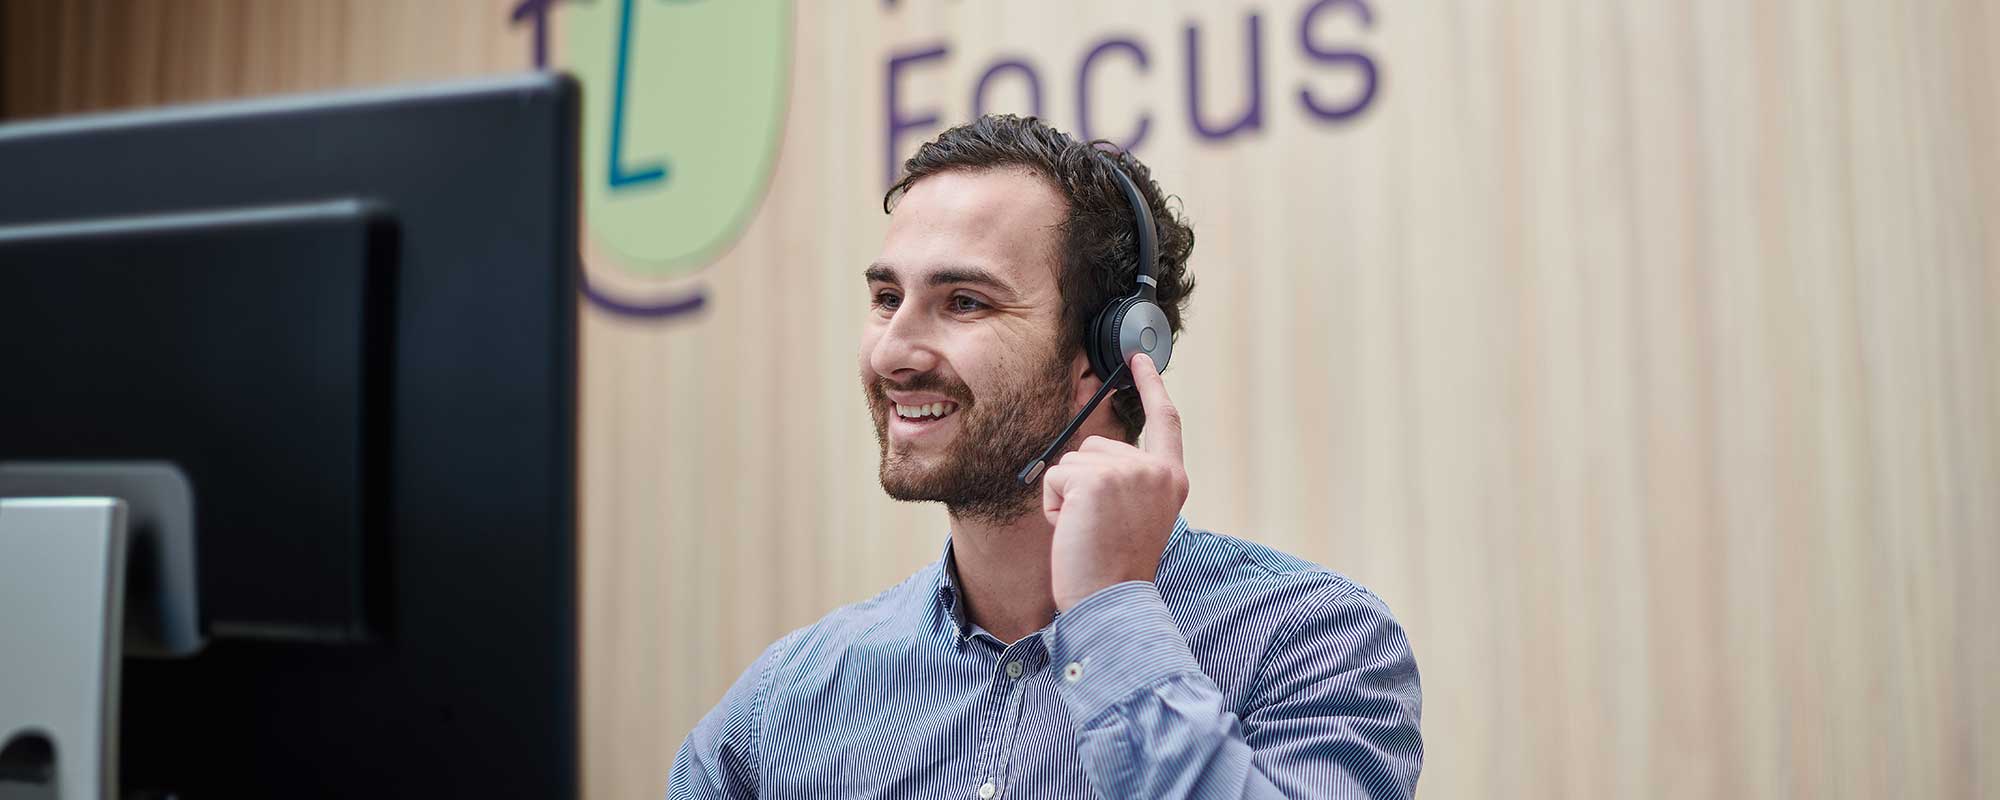 A man taking a call with a headset